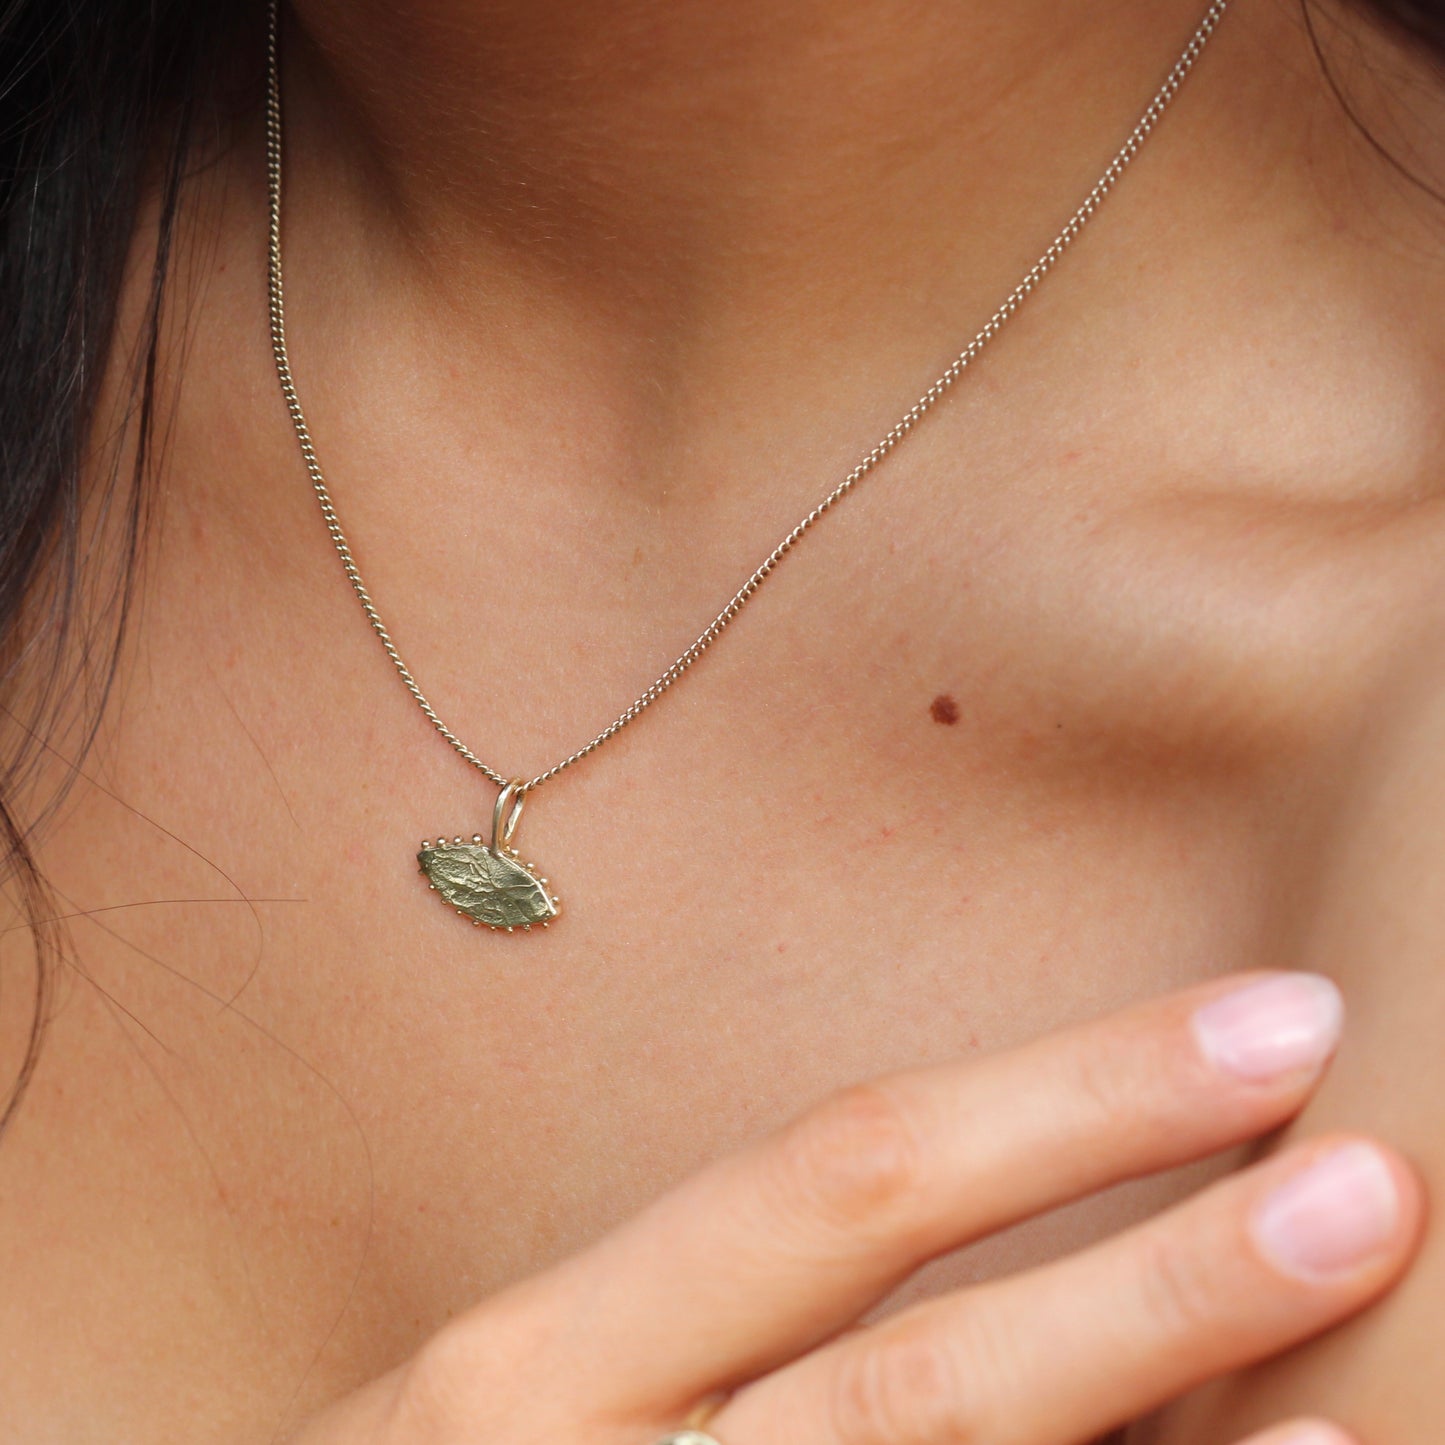 The Horus Necklace